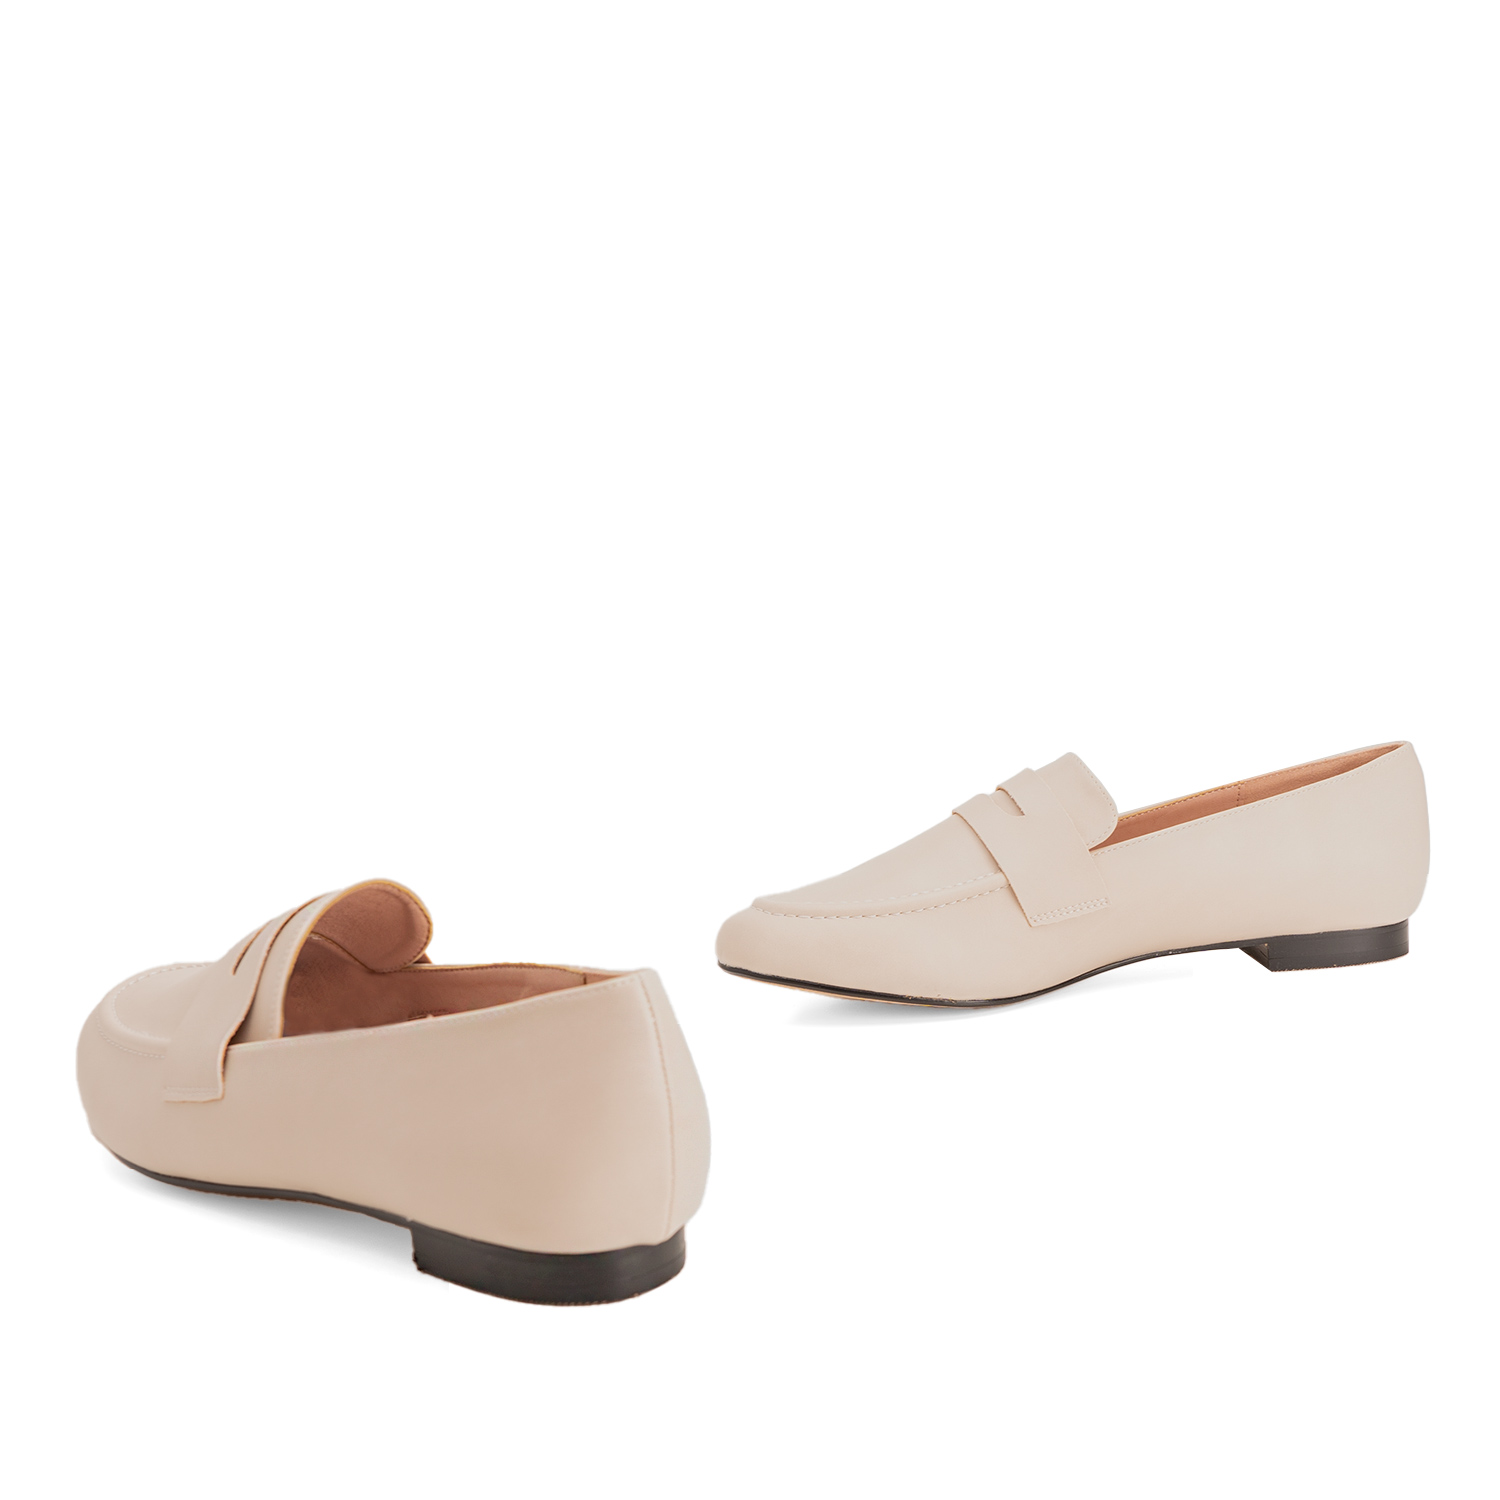 Penny loafer in ivory colored faux leather 